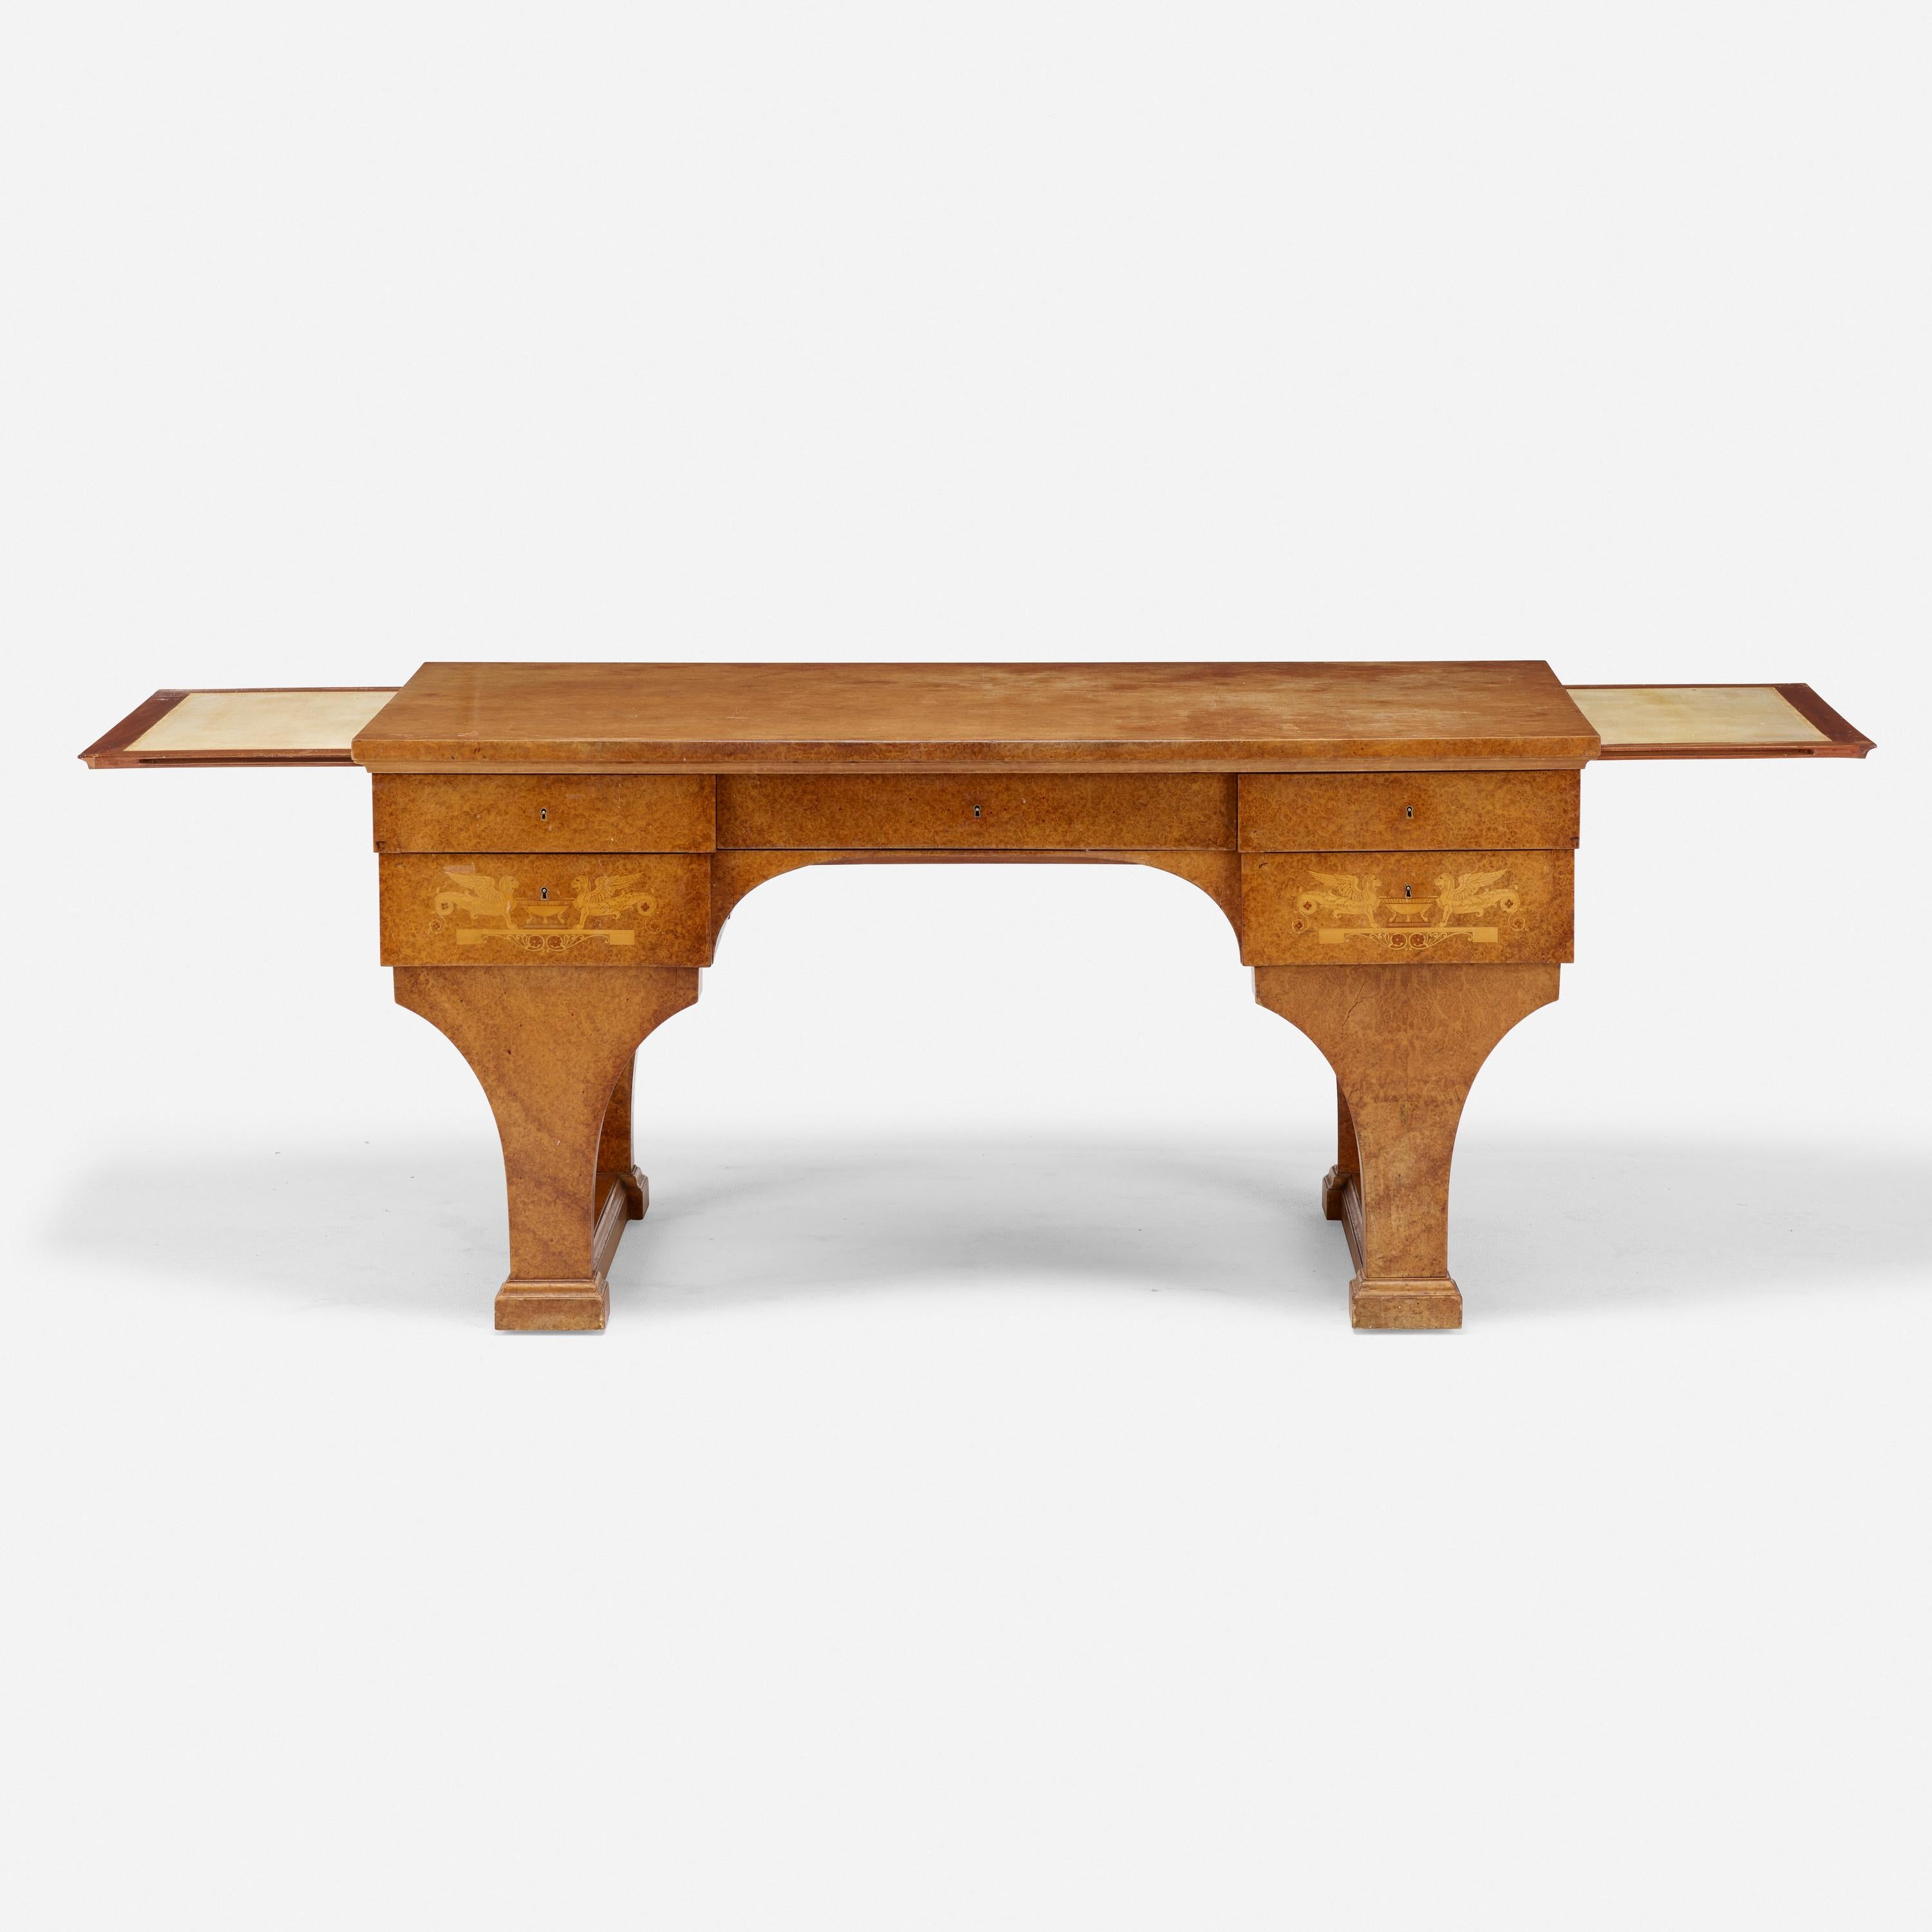 This Boiceau desk bears his stamp, and was entirely veneered in amboyna, an exotic burlwood named for Ambon, the Indonesian island where it was harvested. The naturally squiggling patterning of the veneer provides an overall surface decoration. The